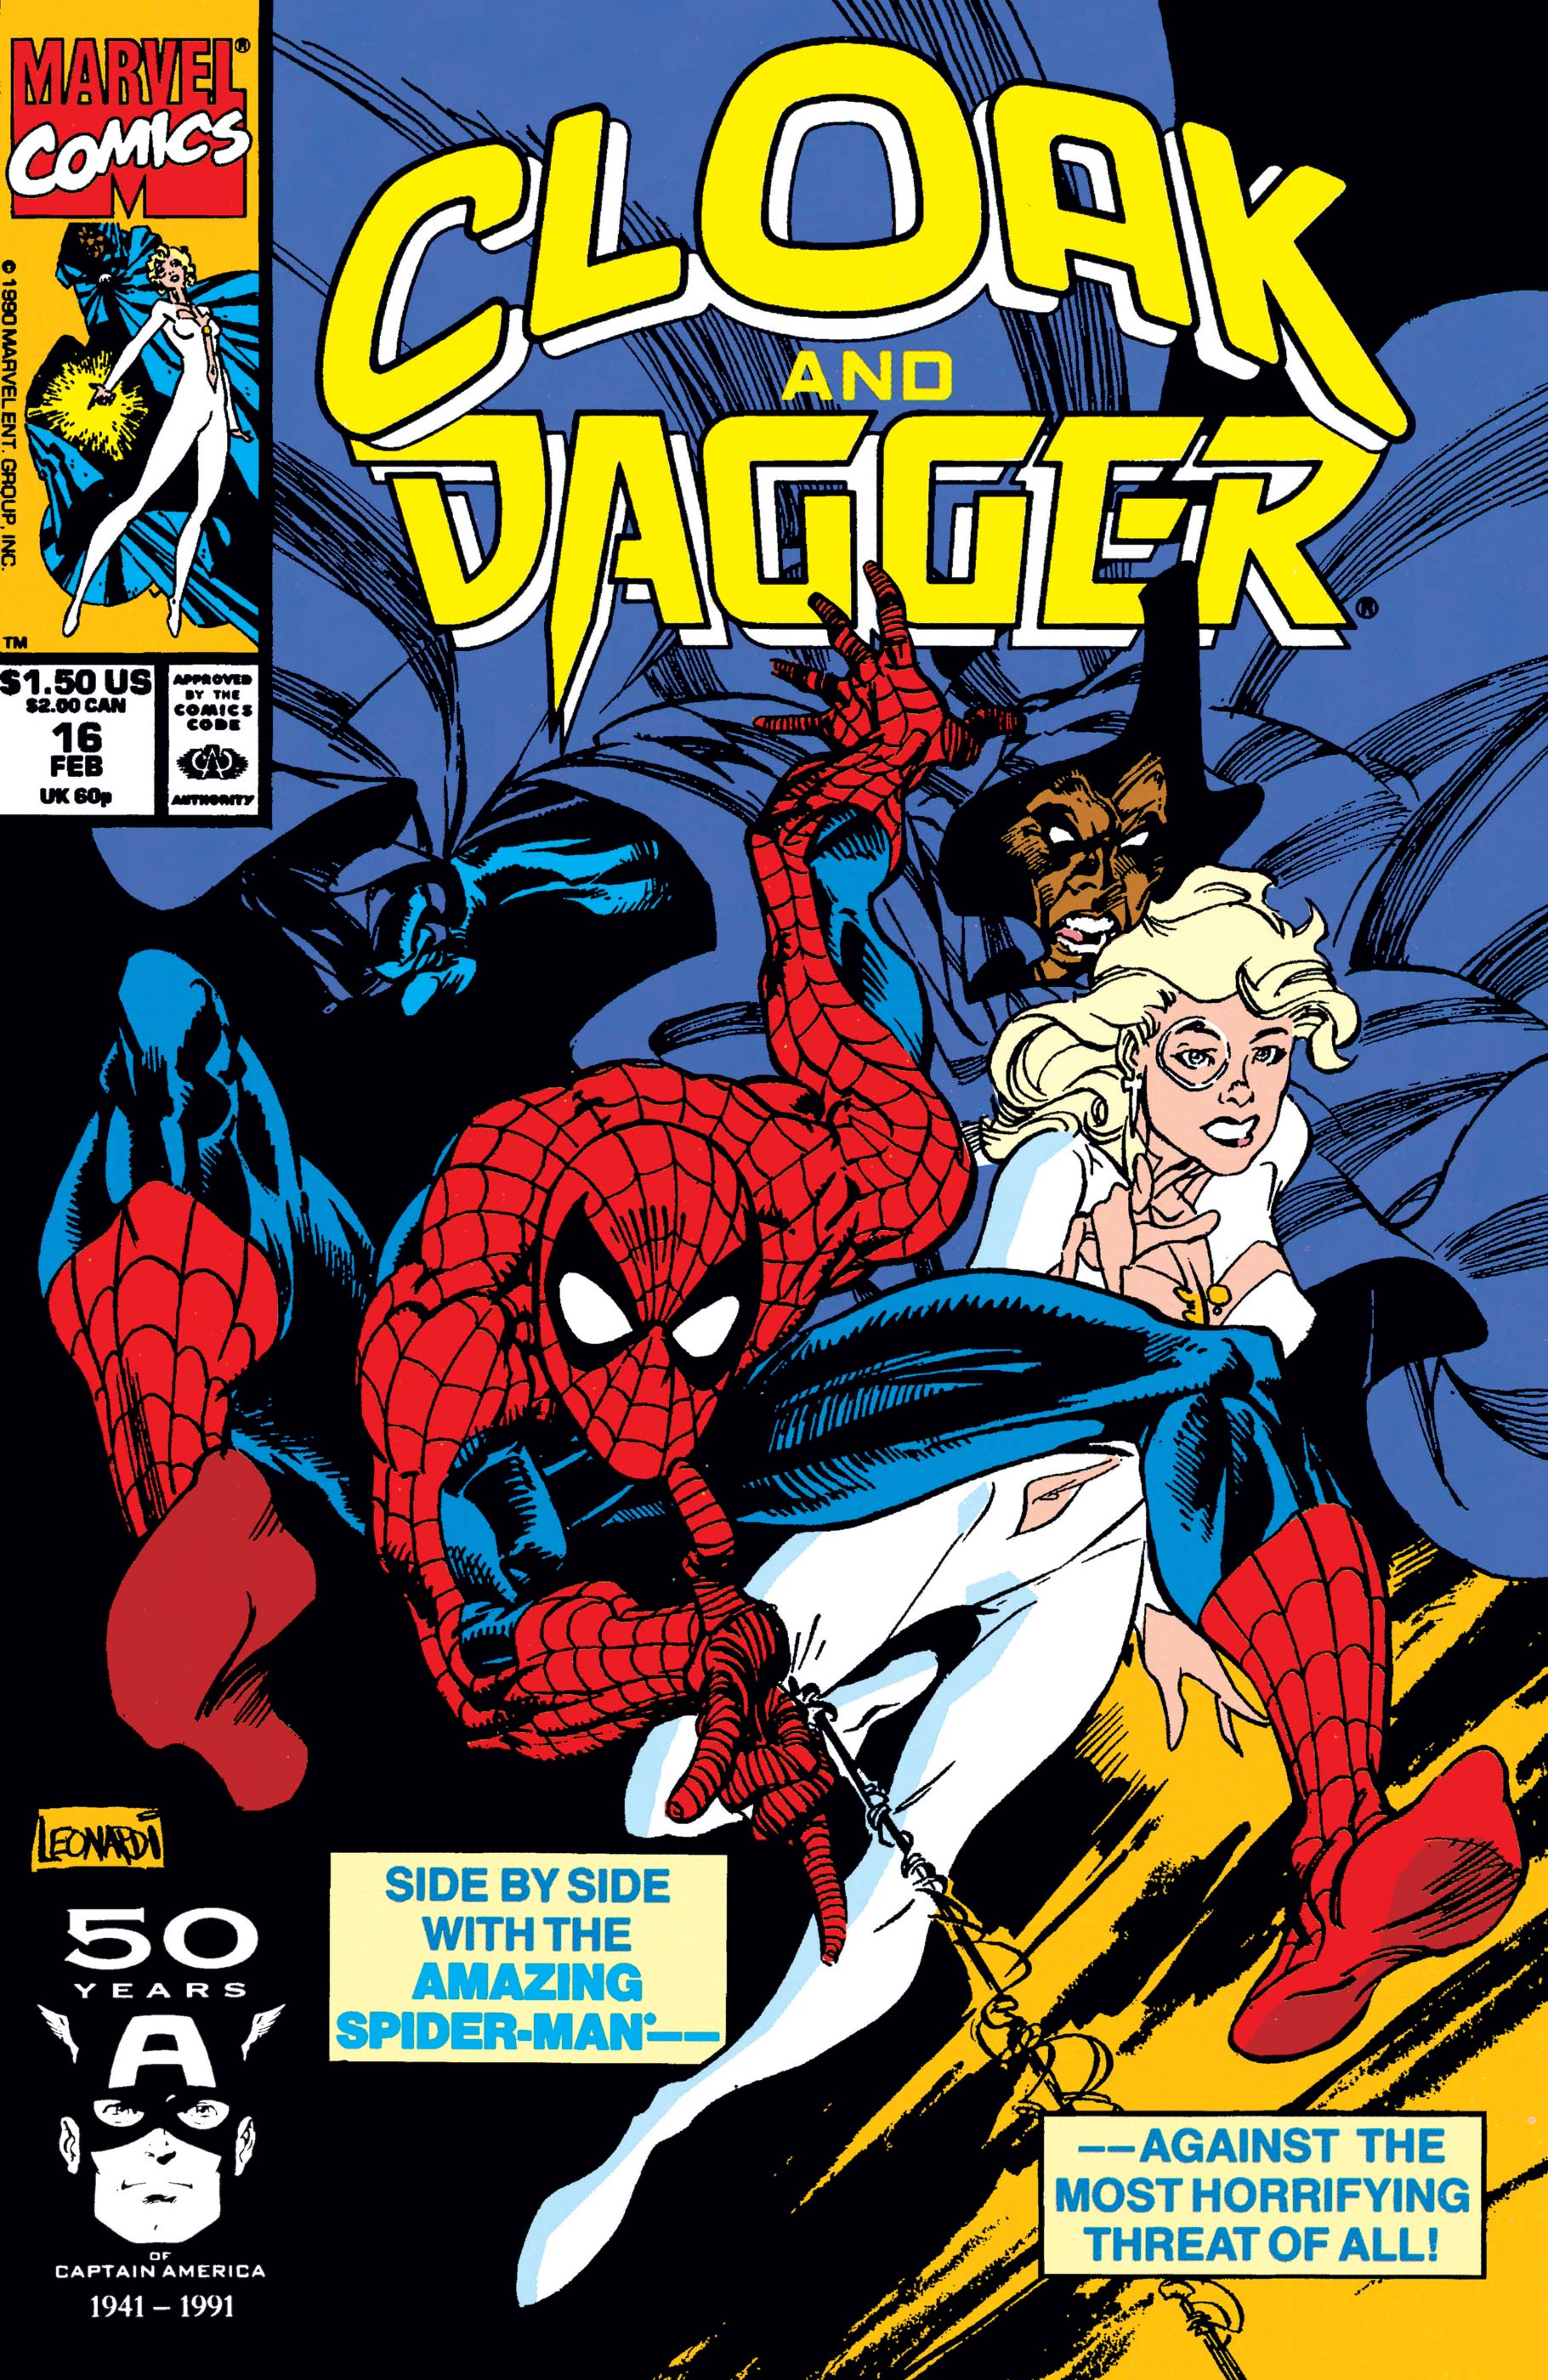 The Mutant Misadventures of Cloak and Dagger (1988) #16